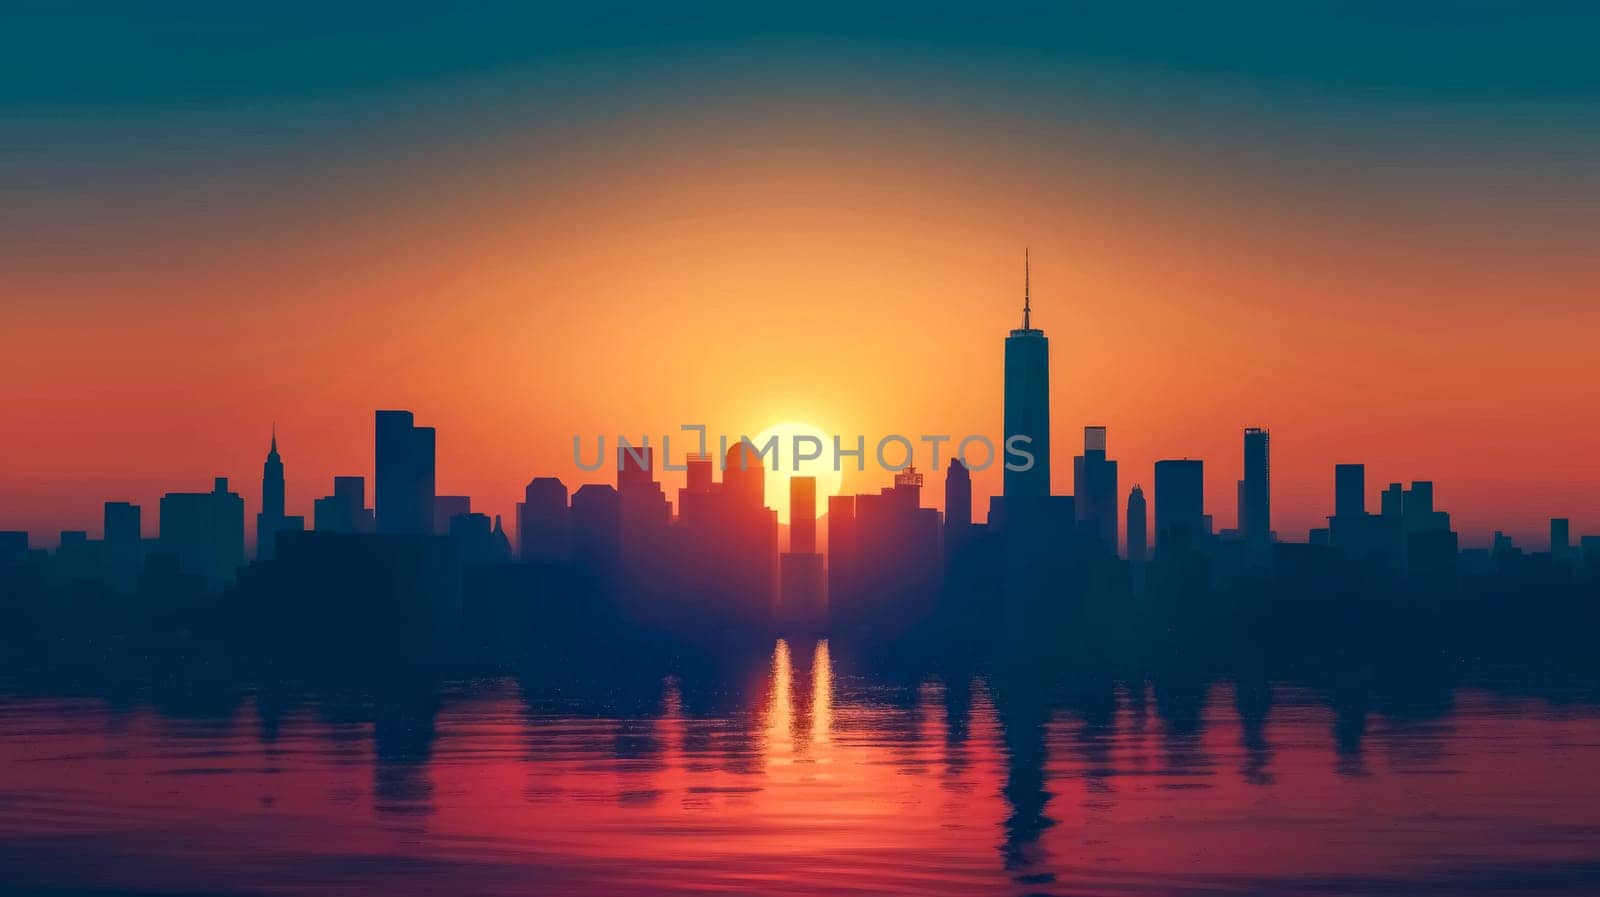 Tranquil urban sunrise silhouette over city skyline with vibrant orange sky and warm sunlight reflection on water. Showcasing the peaceful and atmospheric morning atmosphere in the metropolitan area